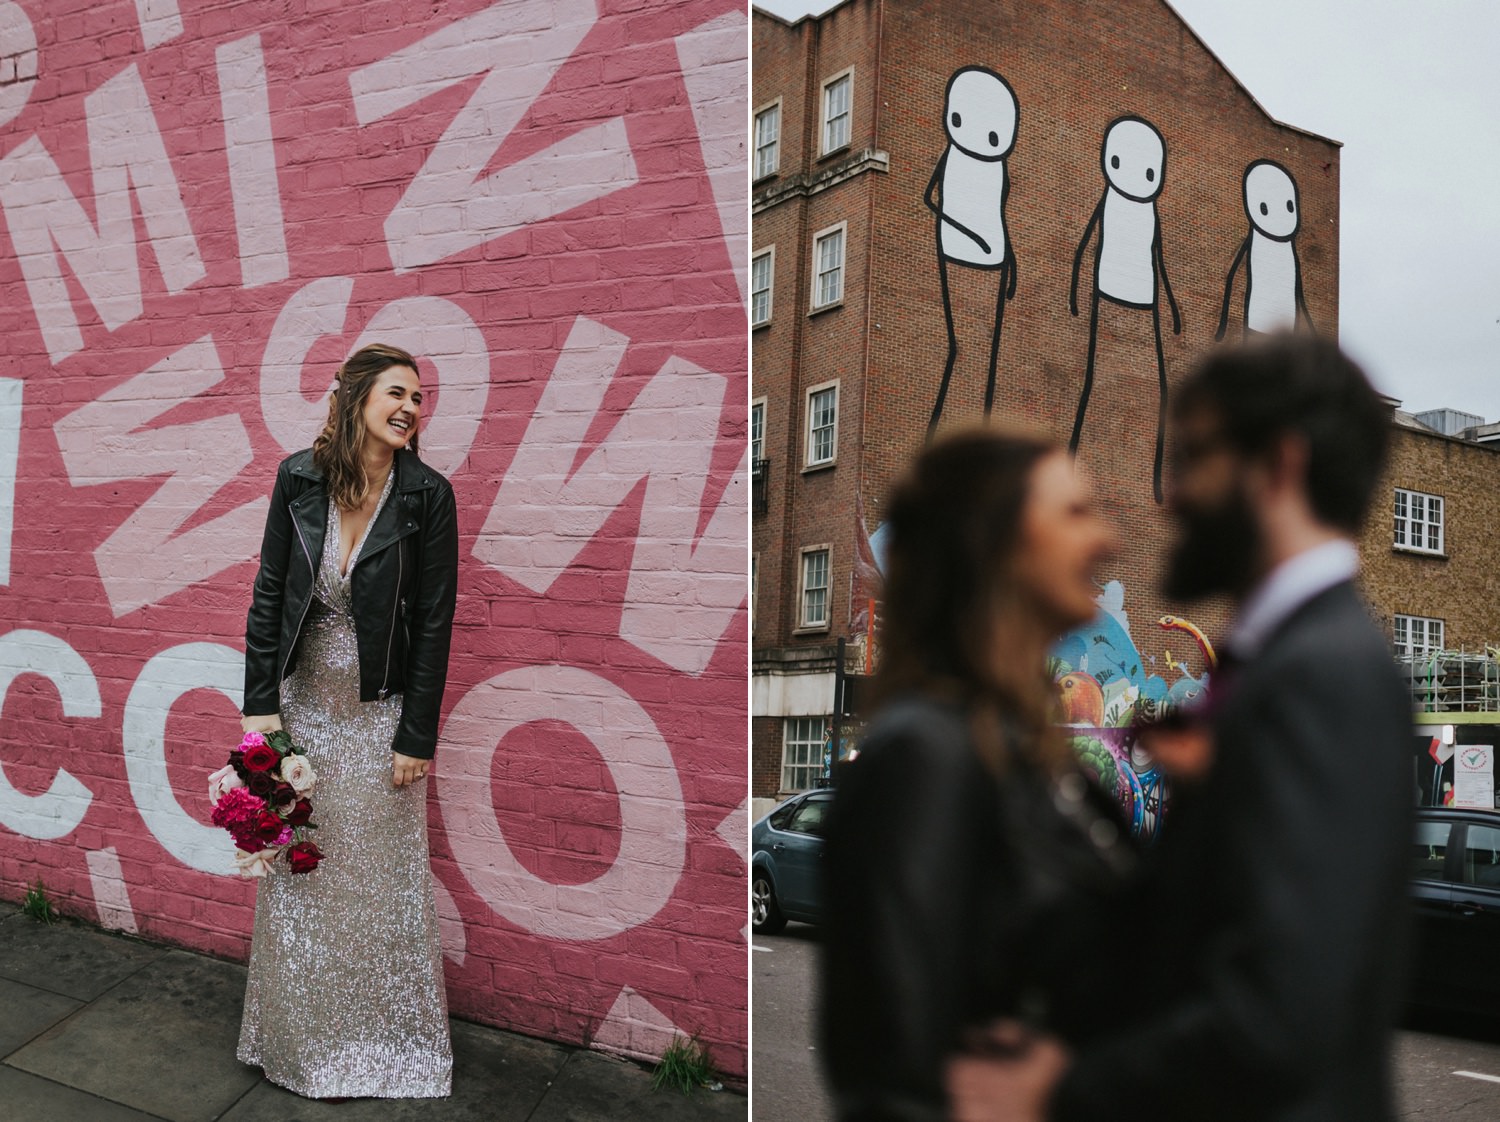 Newlyweds in the streets of London during their photoshoot.